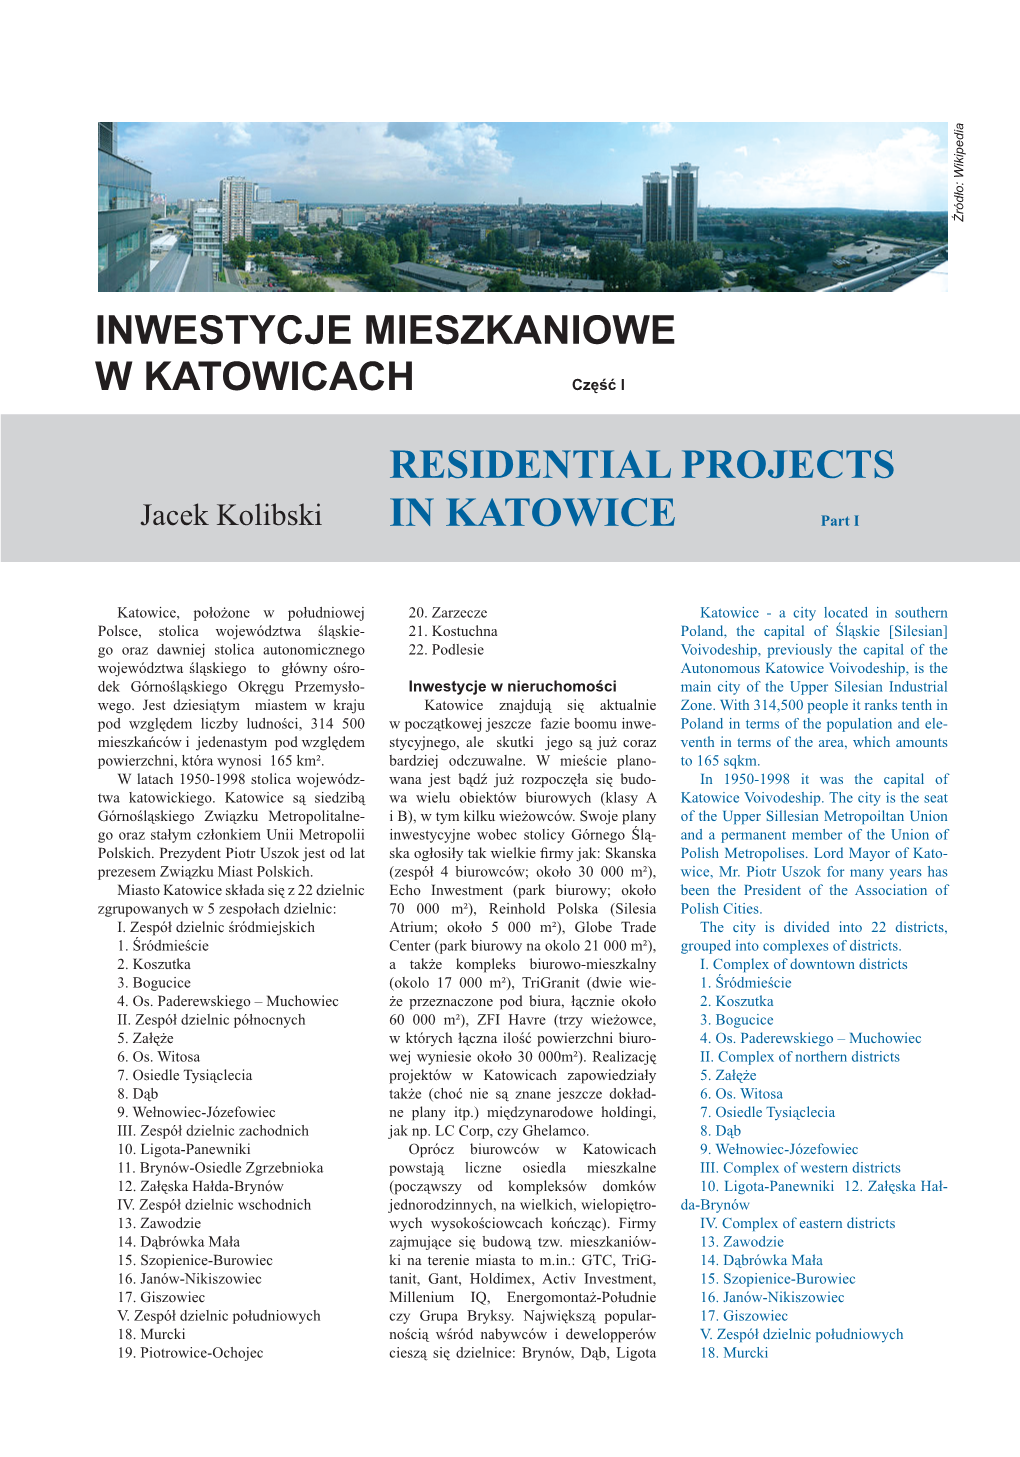 Residential Projects in Katowice